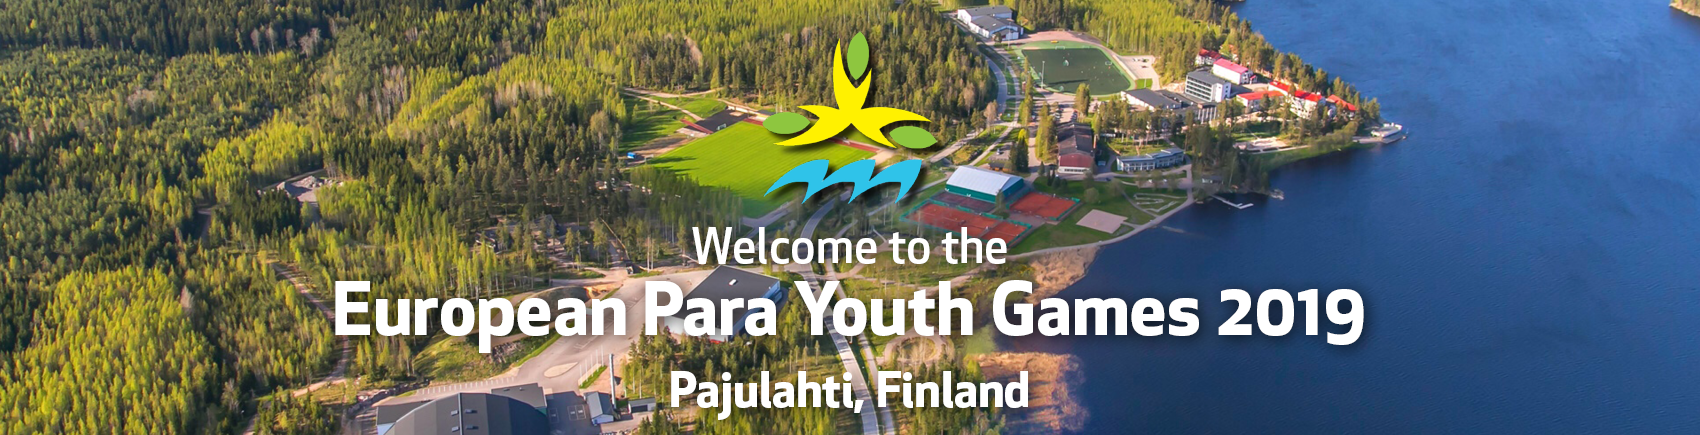 Pajulahti in Finland is all set to host the fifth edition of the European Para Youth Games with the six-day event due to begin tomorrow ©EPYG 2019